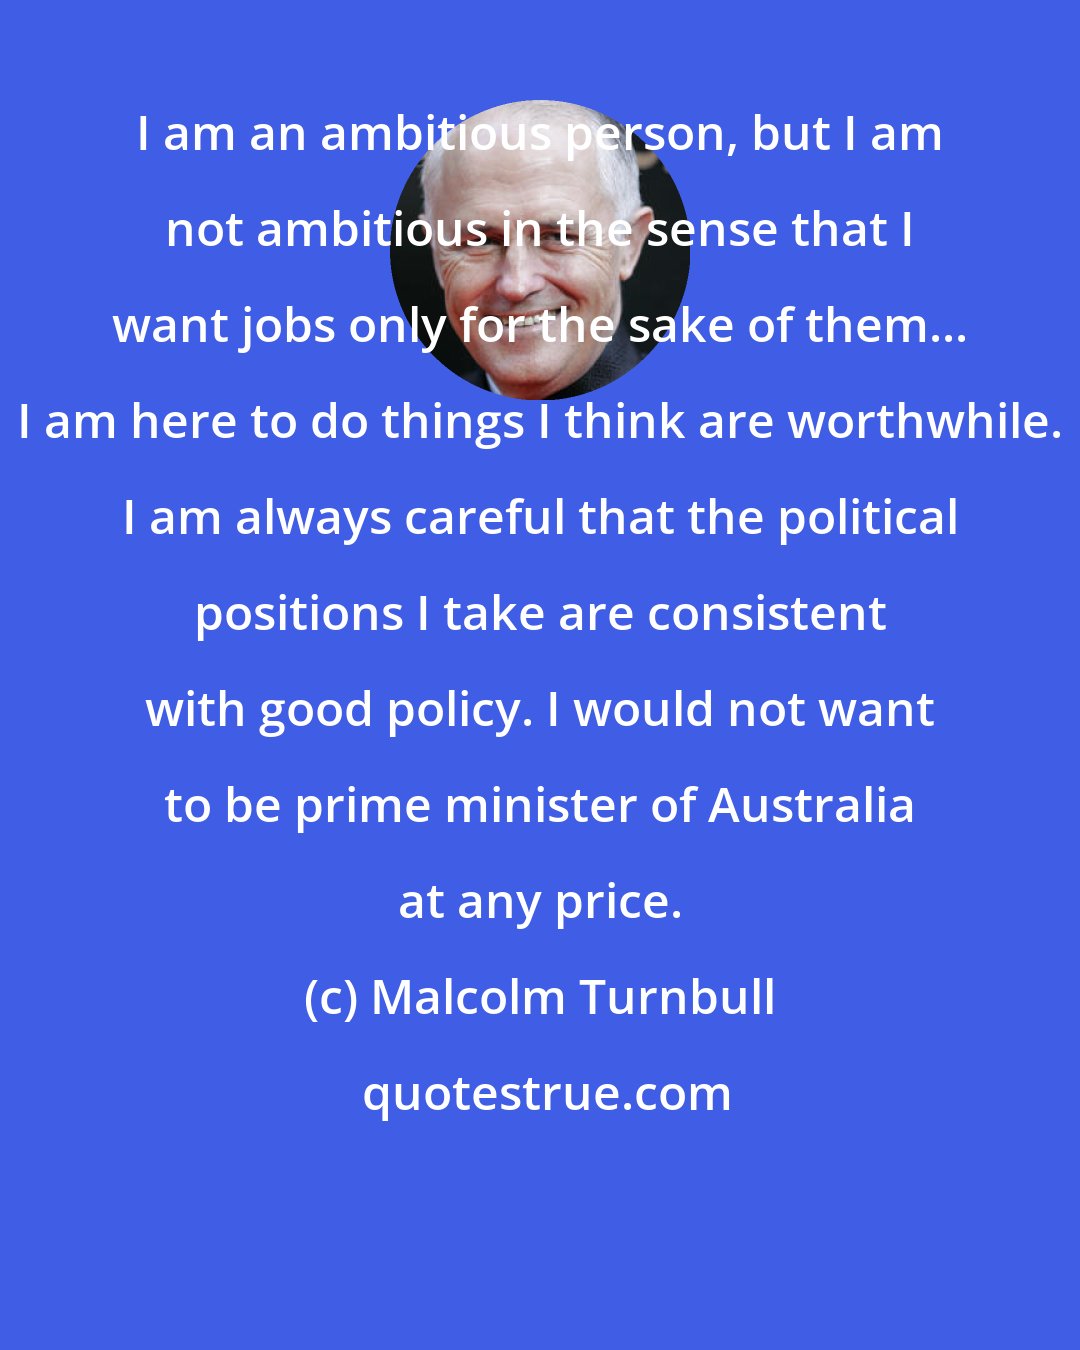 Malcolm Turnbull: I am an ambitious person, but I am not ambitious in the sense that I want jobs only for the sake of them... I am here to do things I think are worthwhile. I am always careful that the political positions I take are consistent with good policy. I would not want to be prime minister of Australia at any price.